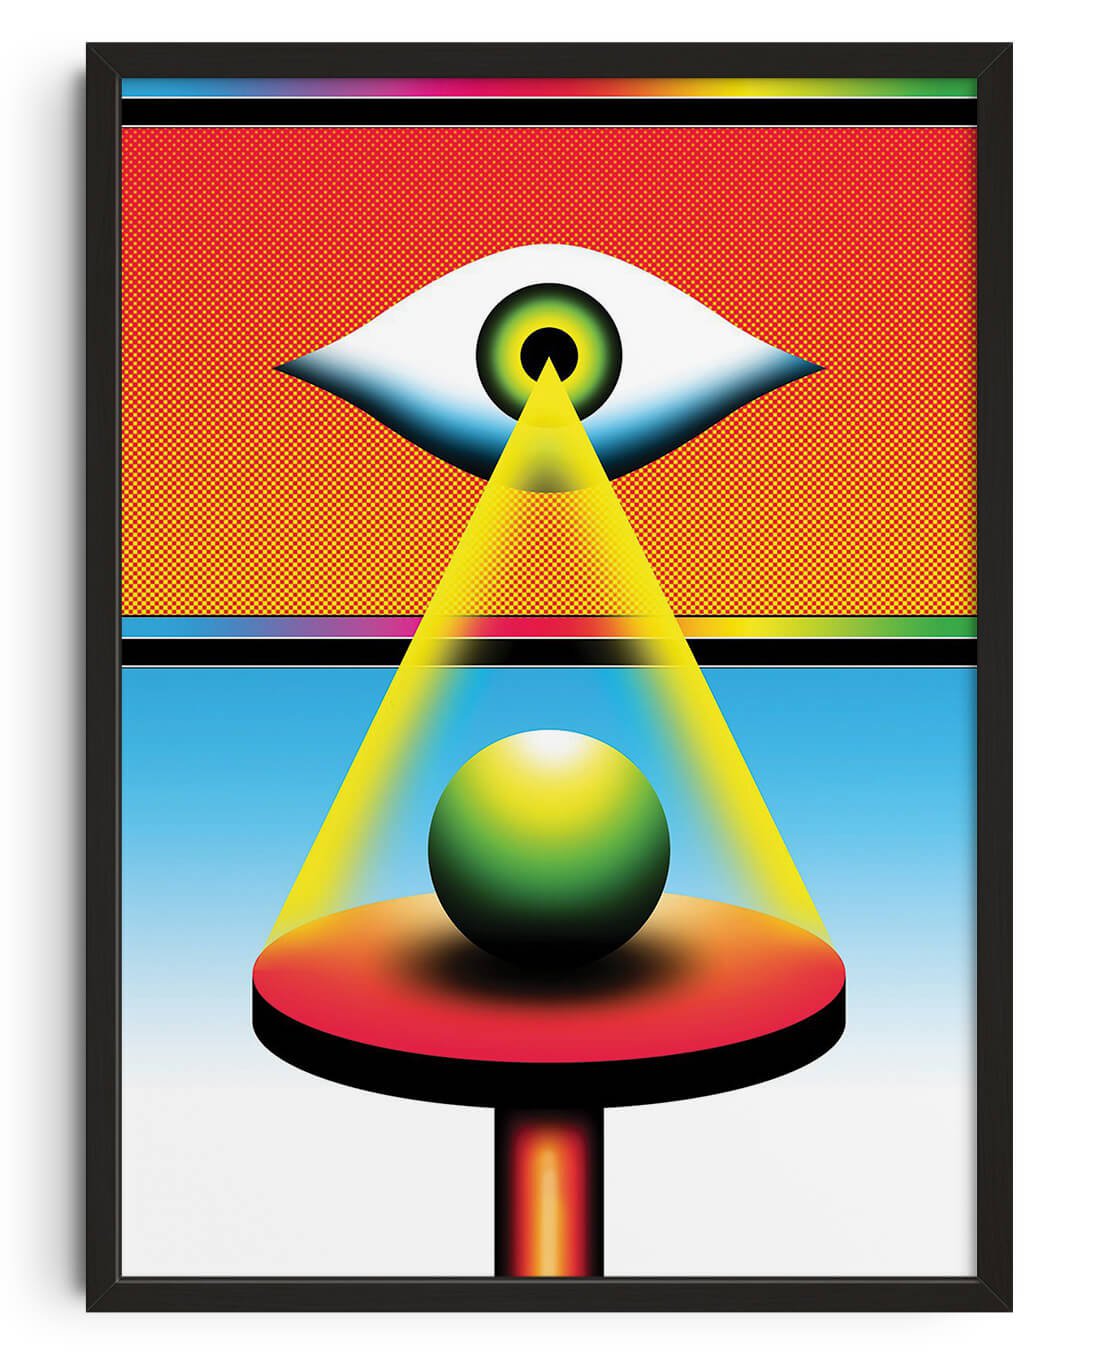 The Eye that Sees All contemporary wall art print by Samuel Finch - sold by DROOL